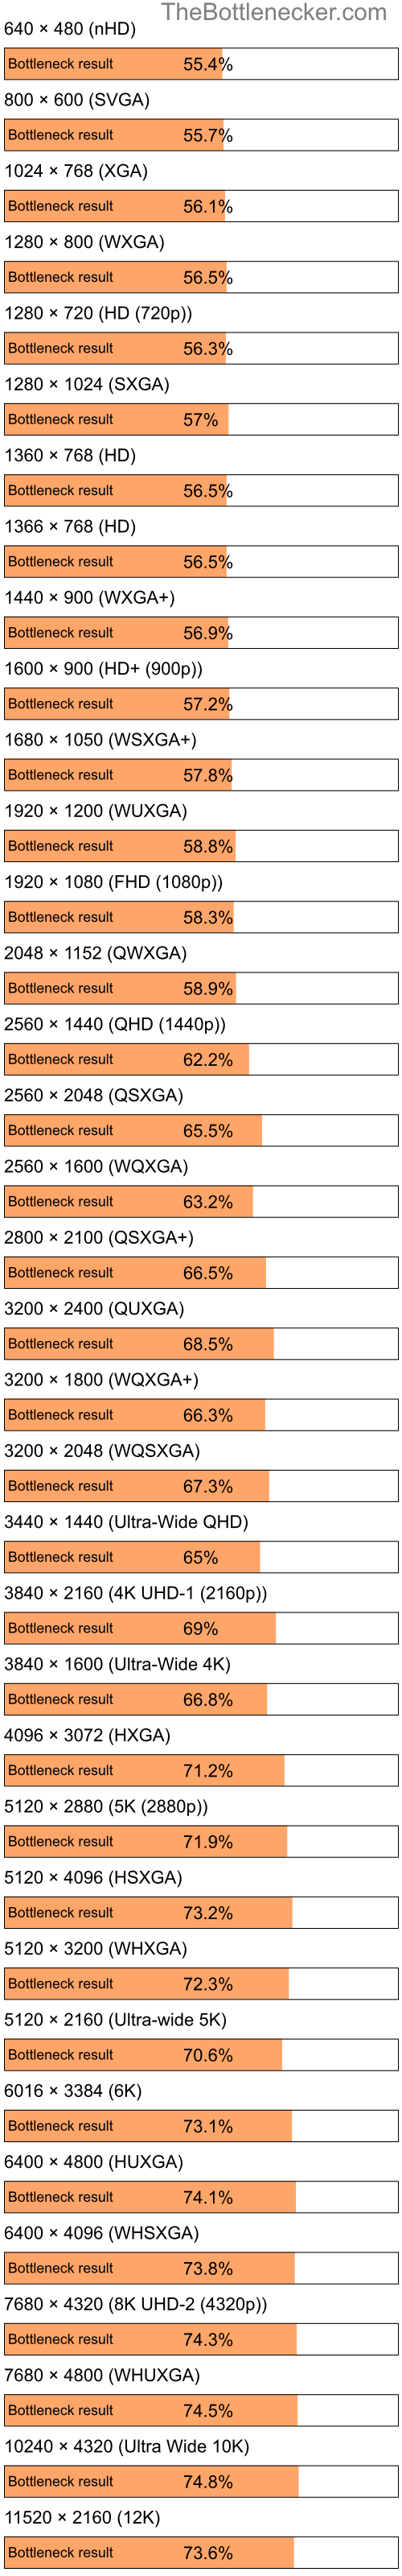 Bottleneck results by resolution for Intel Atom N280 and AMD Mobility Radeon HD 4250 in Processor Intense Tasks